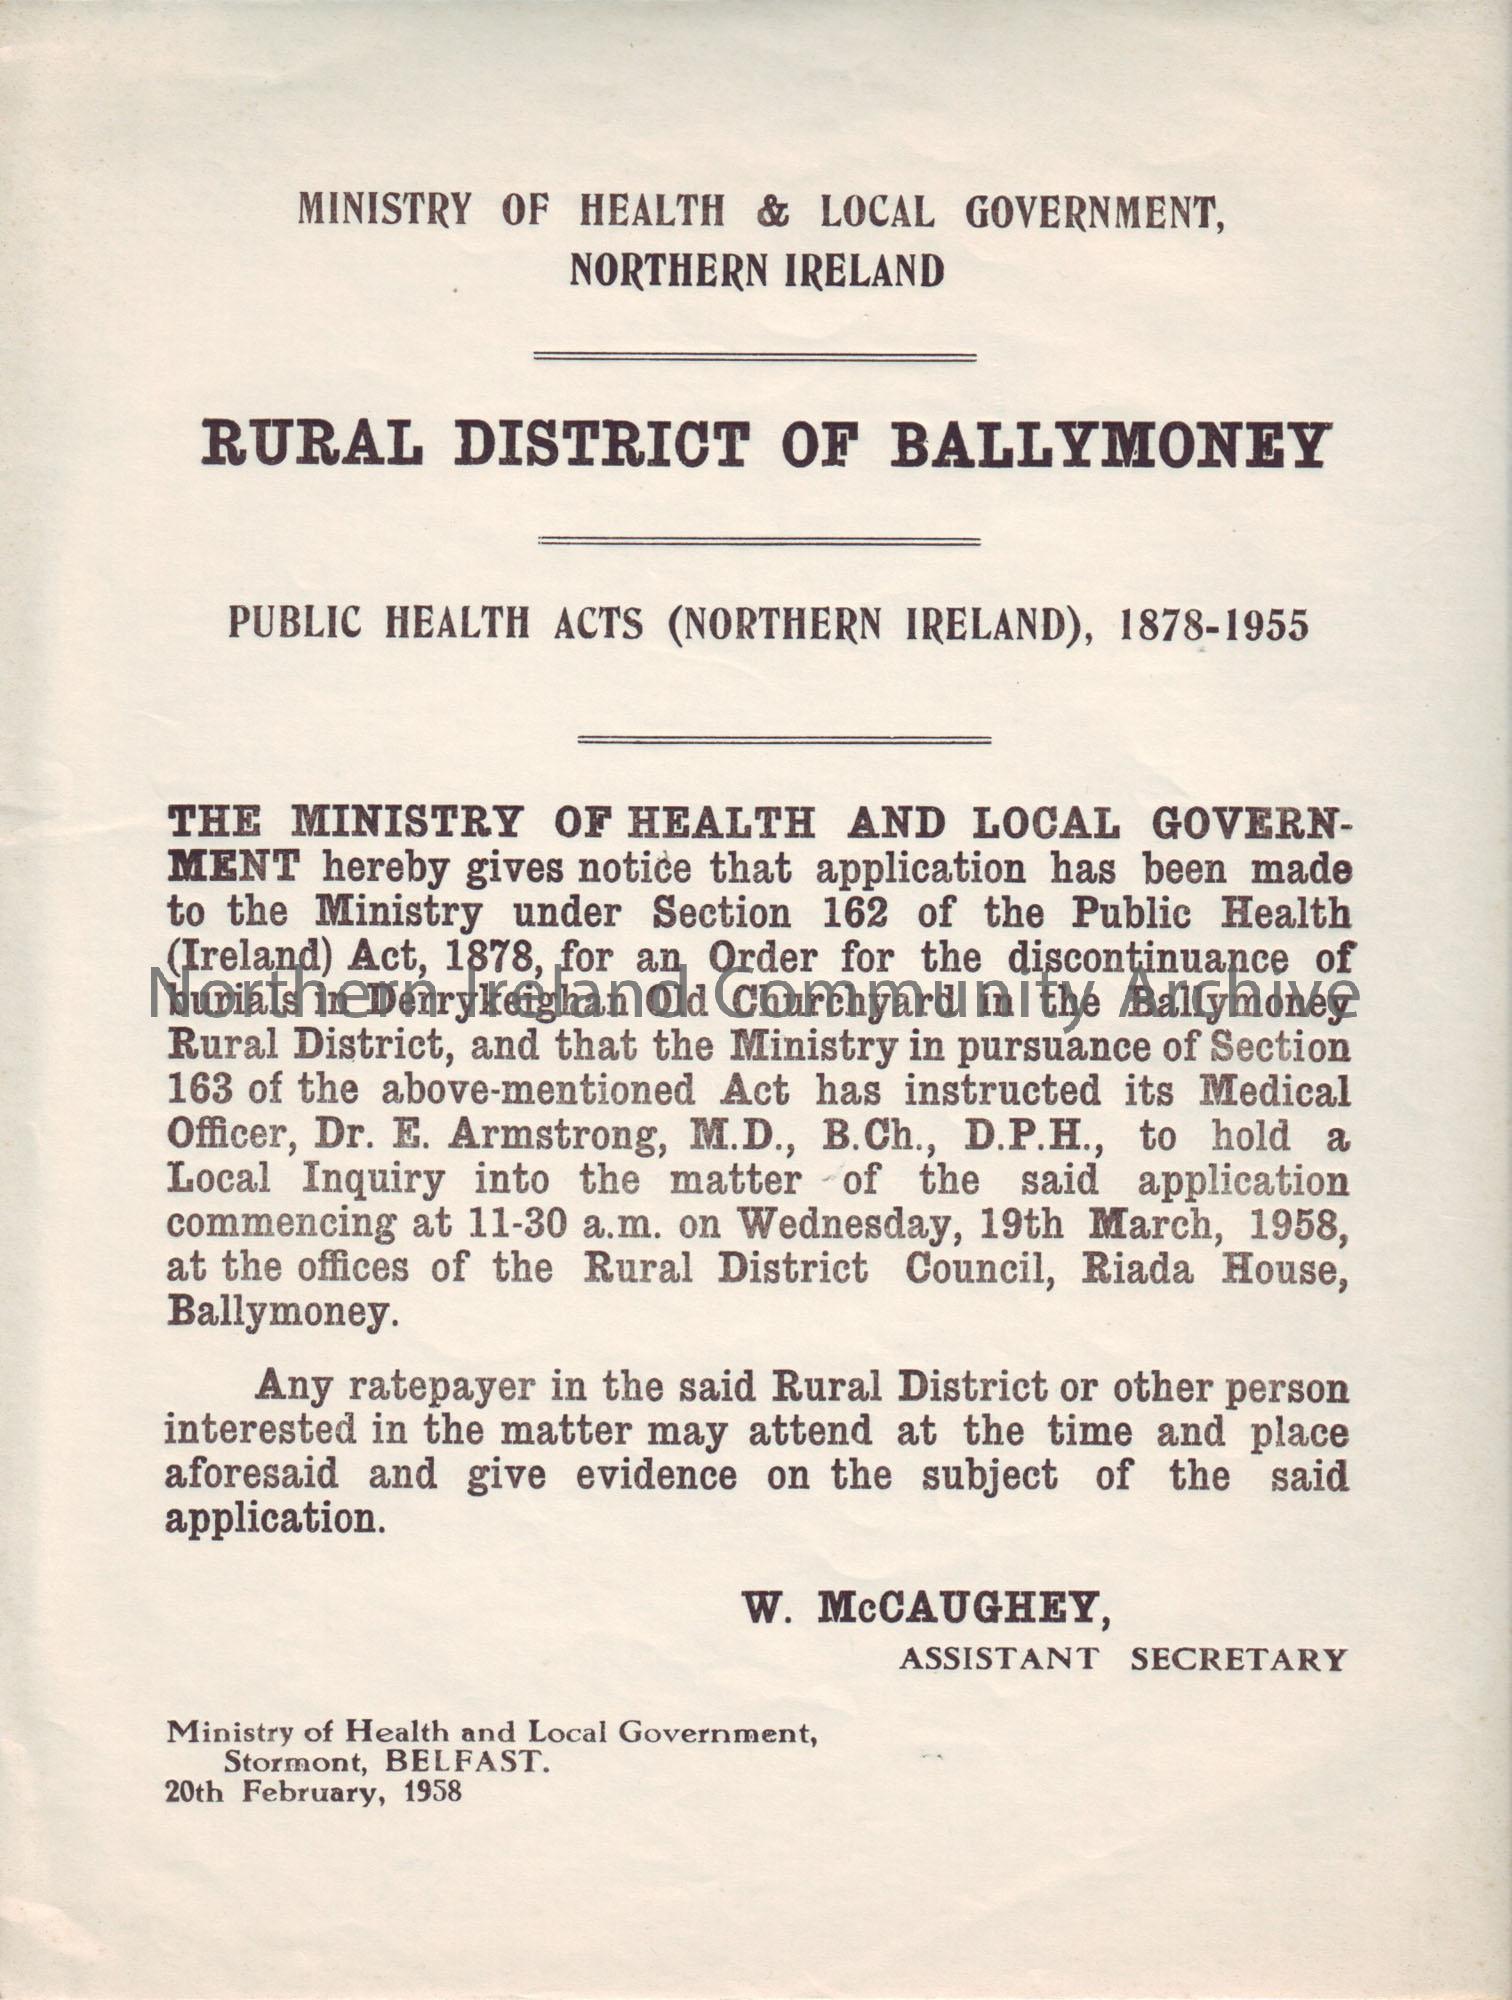 Public Health Acts (Northern Ireland), 1878-1955- regarding the discontinuance of burials in Derrykeighan Old Churchyard